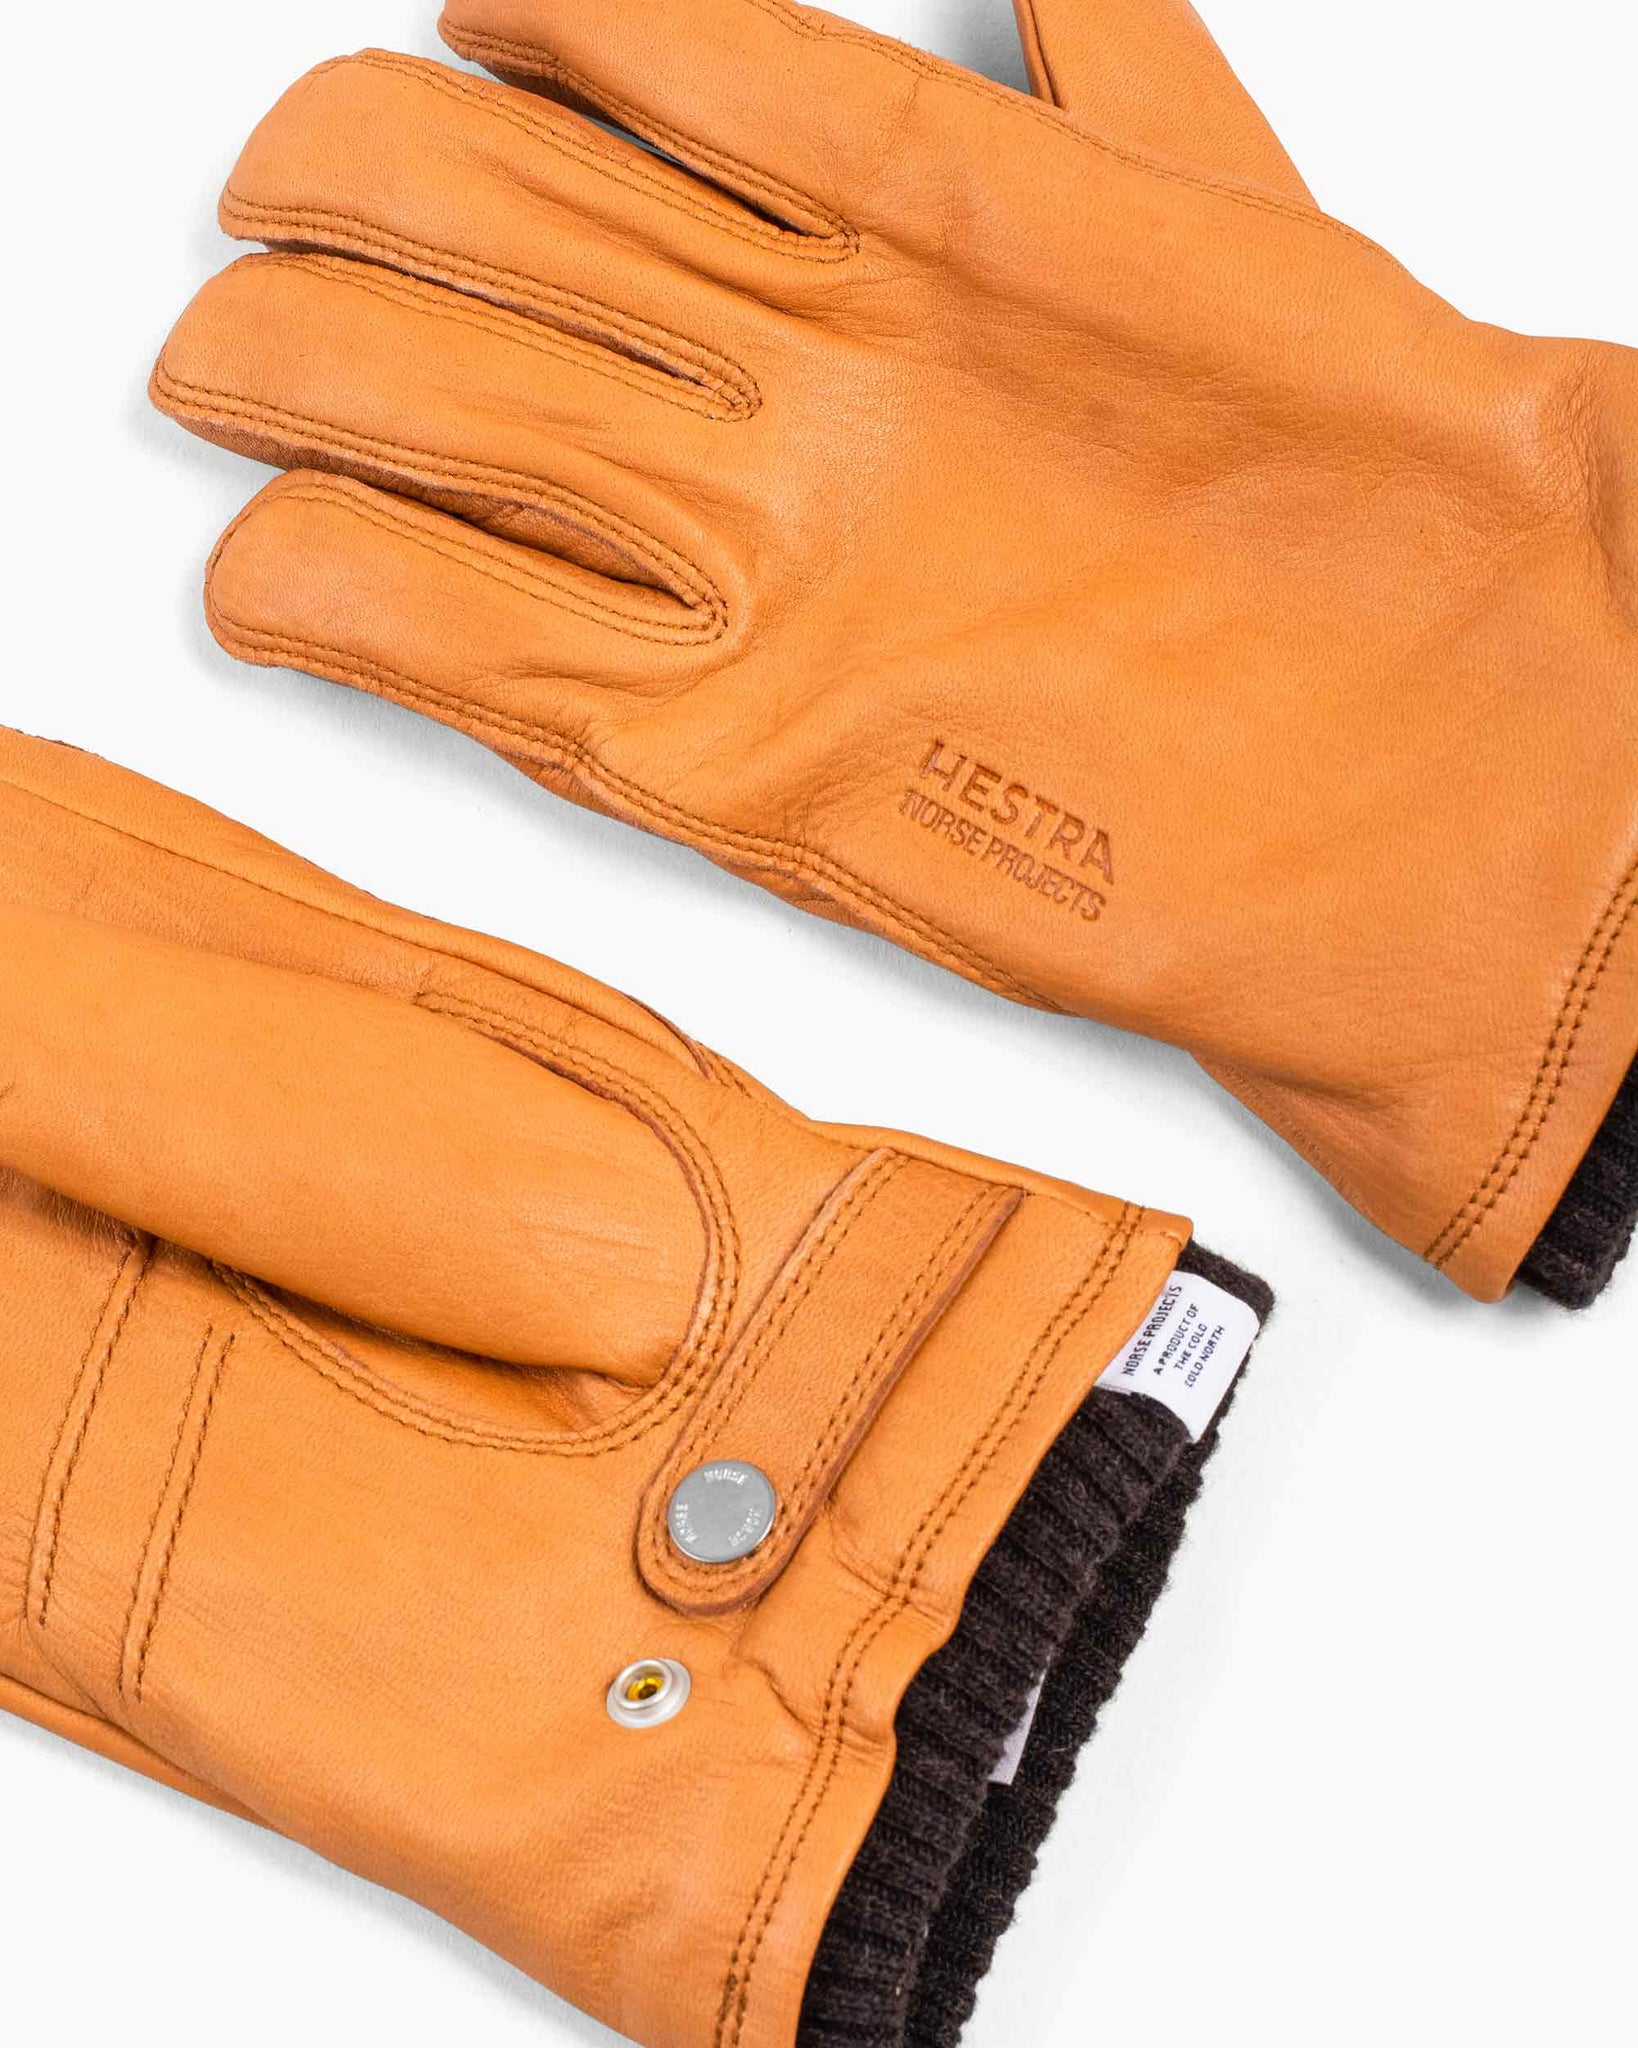 Norse Projects x Hestra Utsjo Tobacco Gloves Details